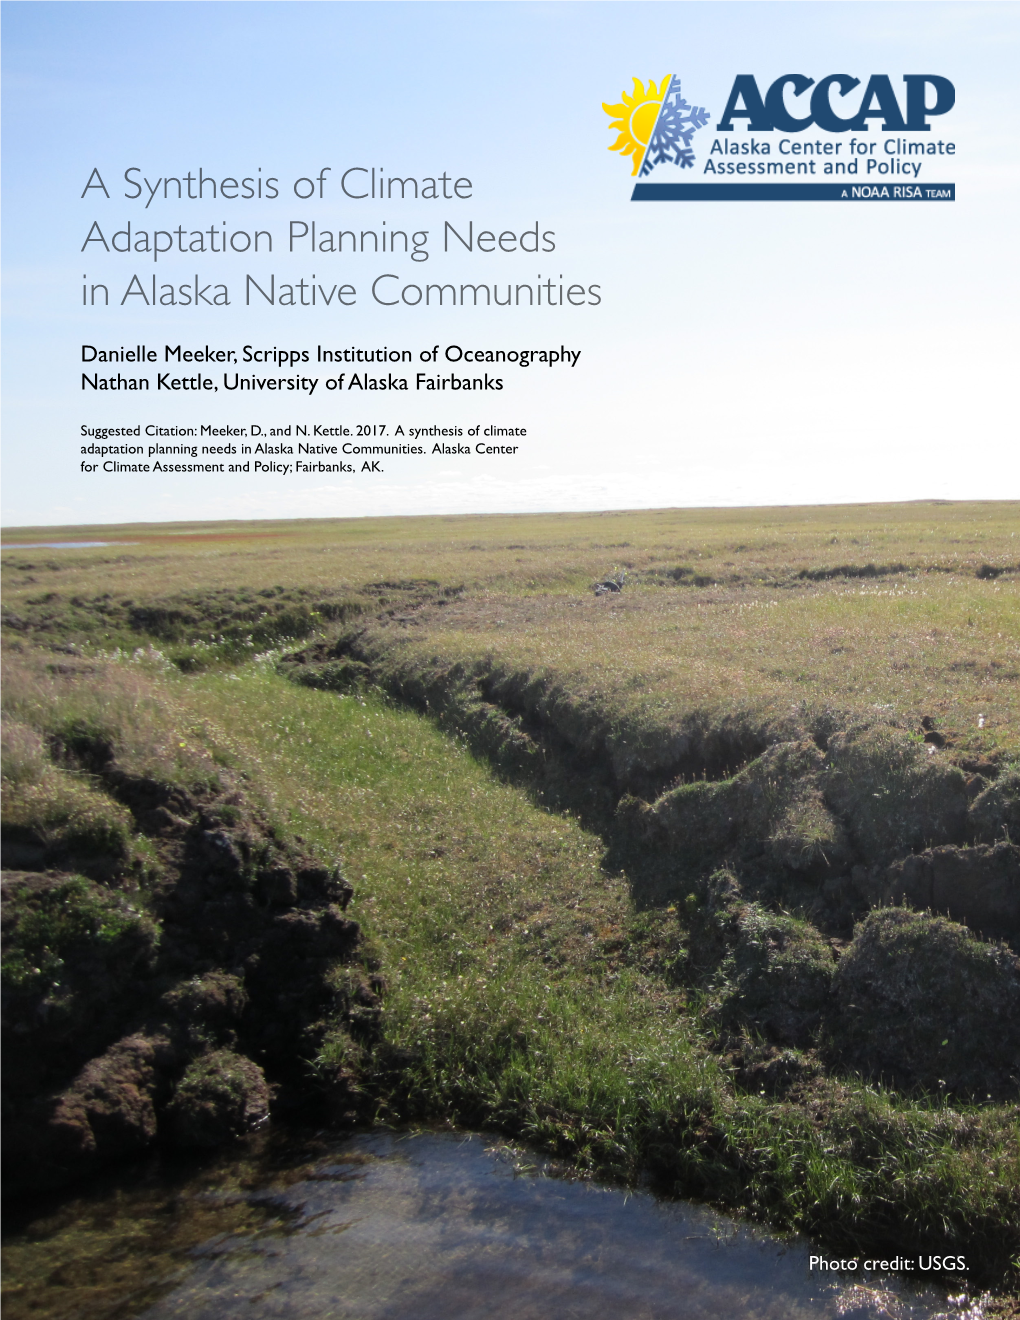 A Synthesis of Climate Adaptation Planning Needs in Alaska Native Communities